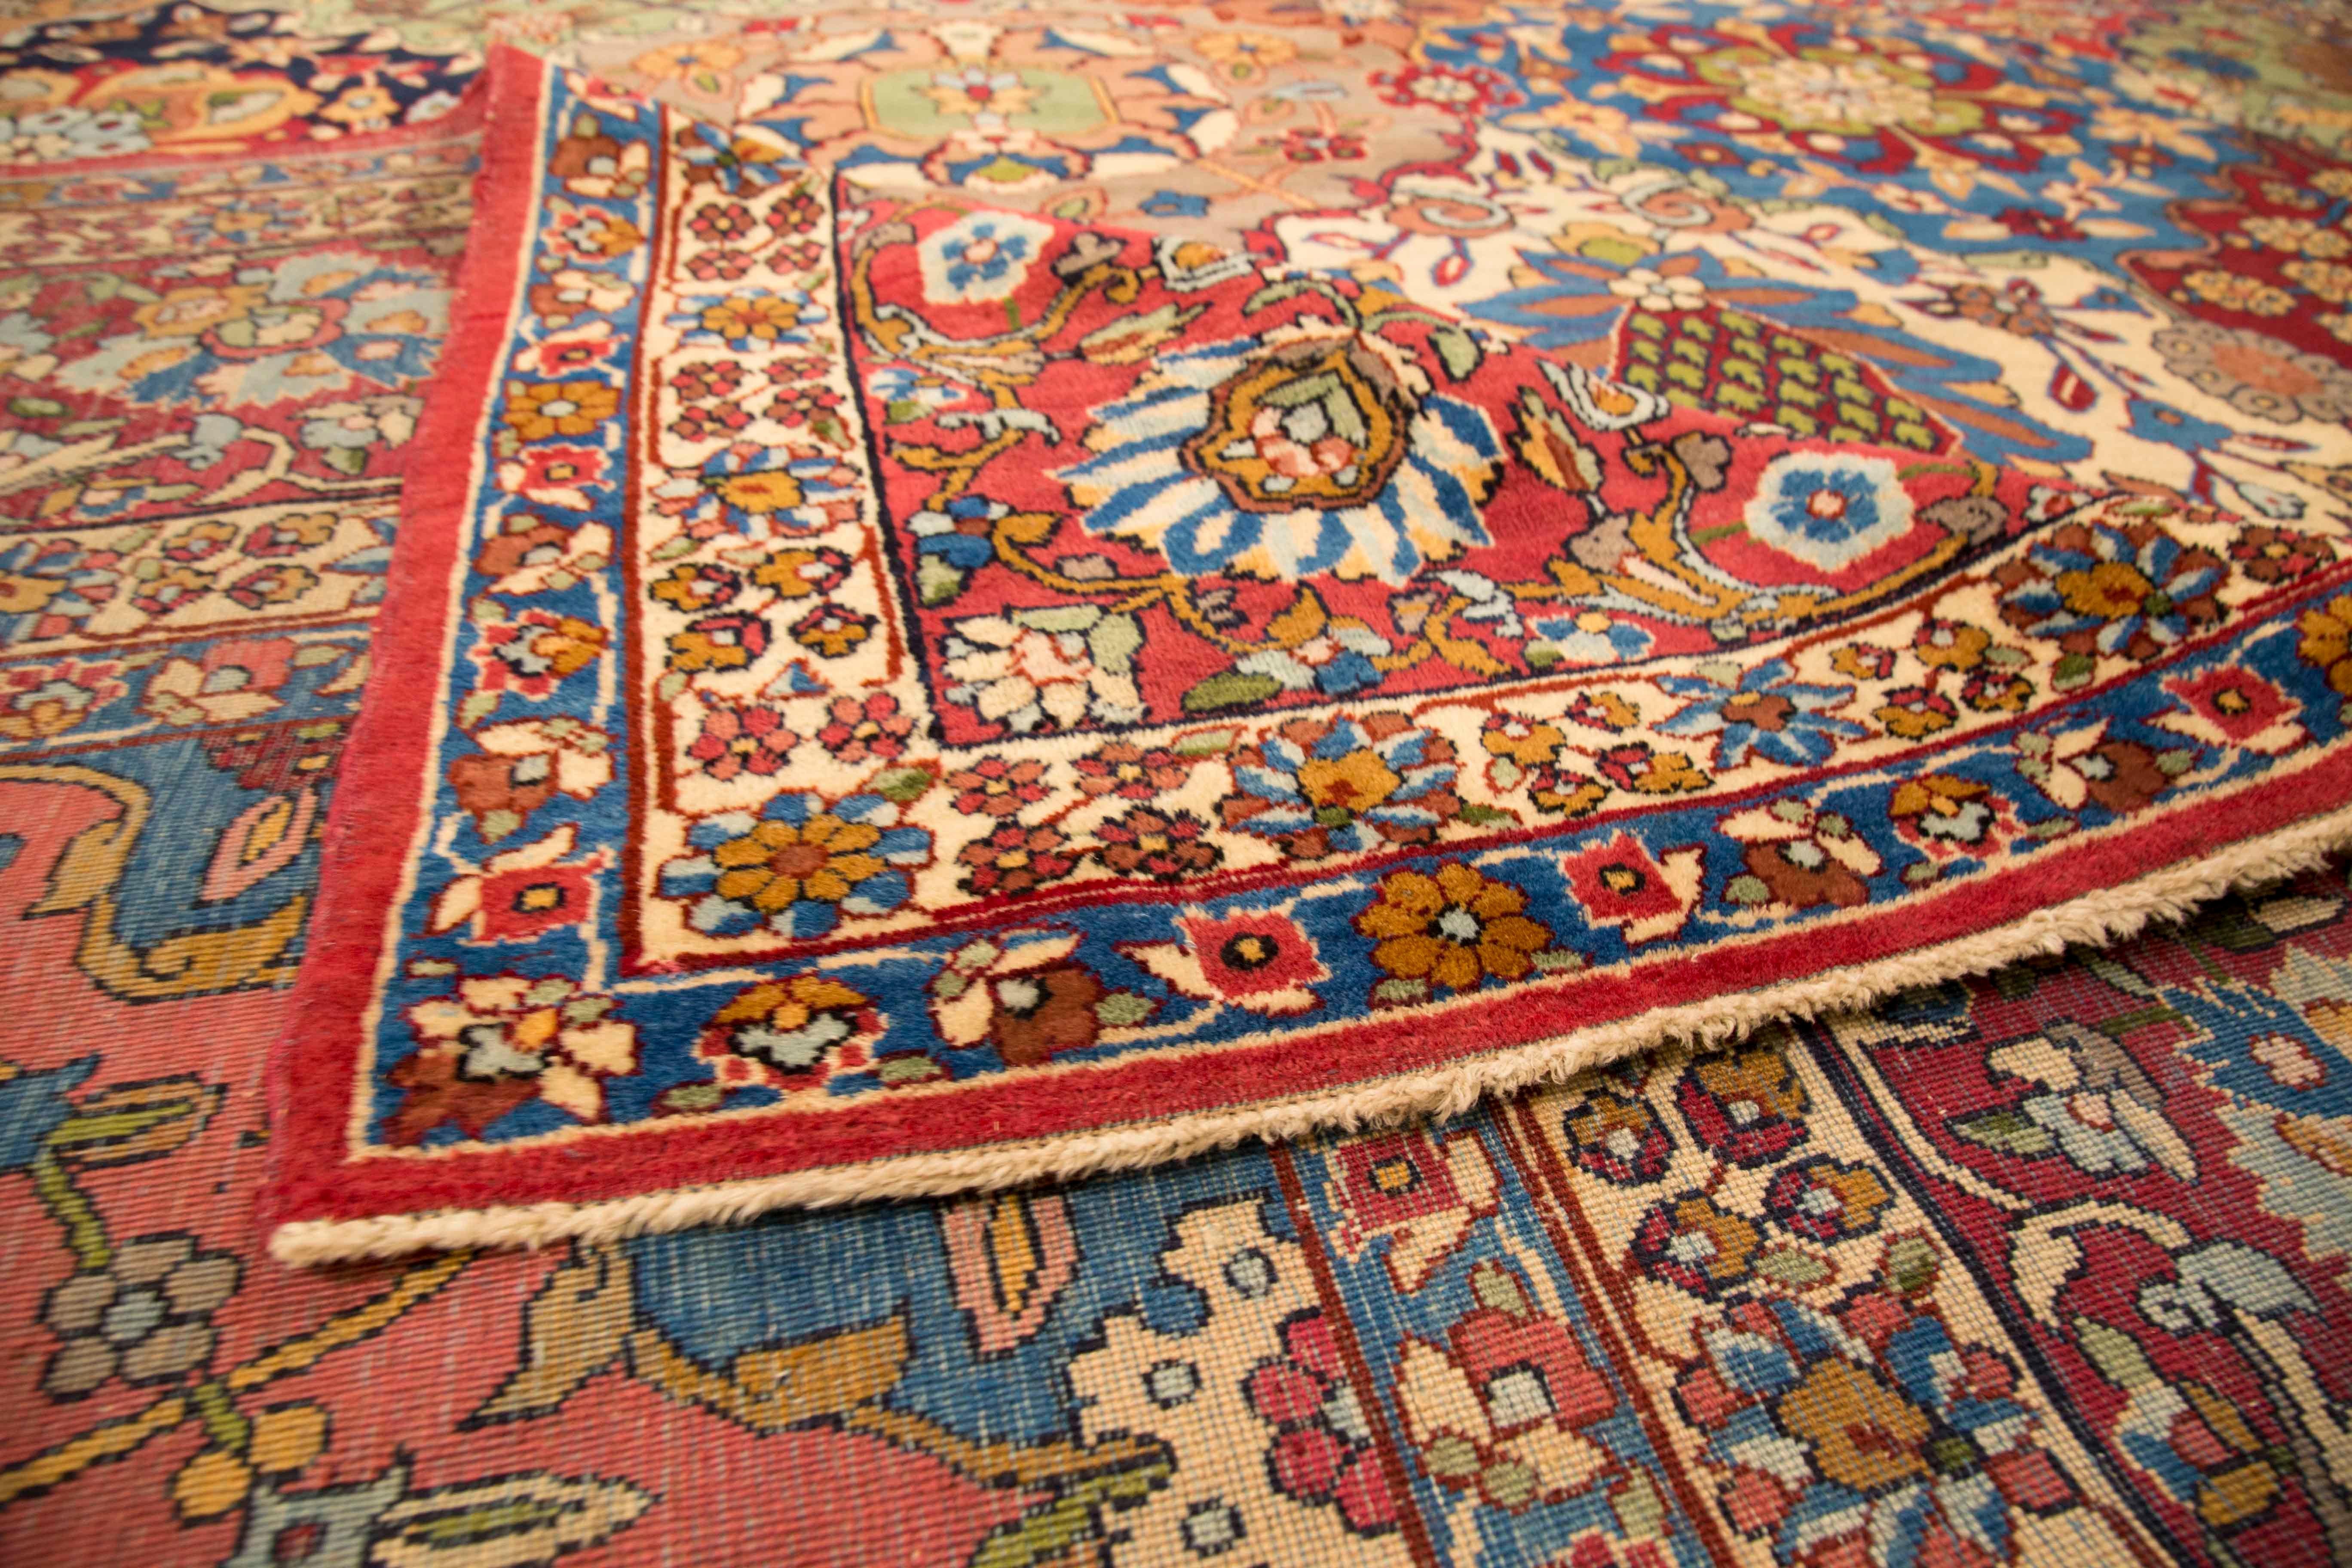 Antique Persian rug made in the 1920s. It’s handmade from fine, exquisite wool and colored with rich organic vegetable dyes. It features an open field design with multicolored flower bouquet patterns. This antique Persian rug has borders that are